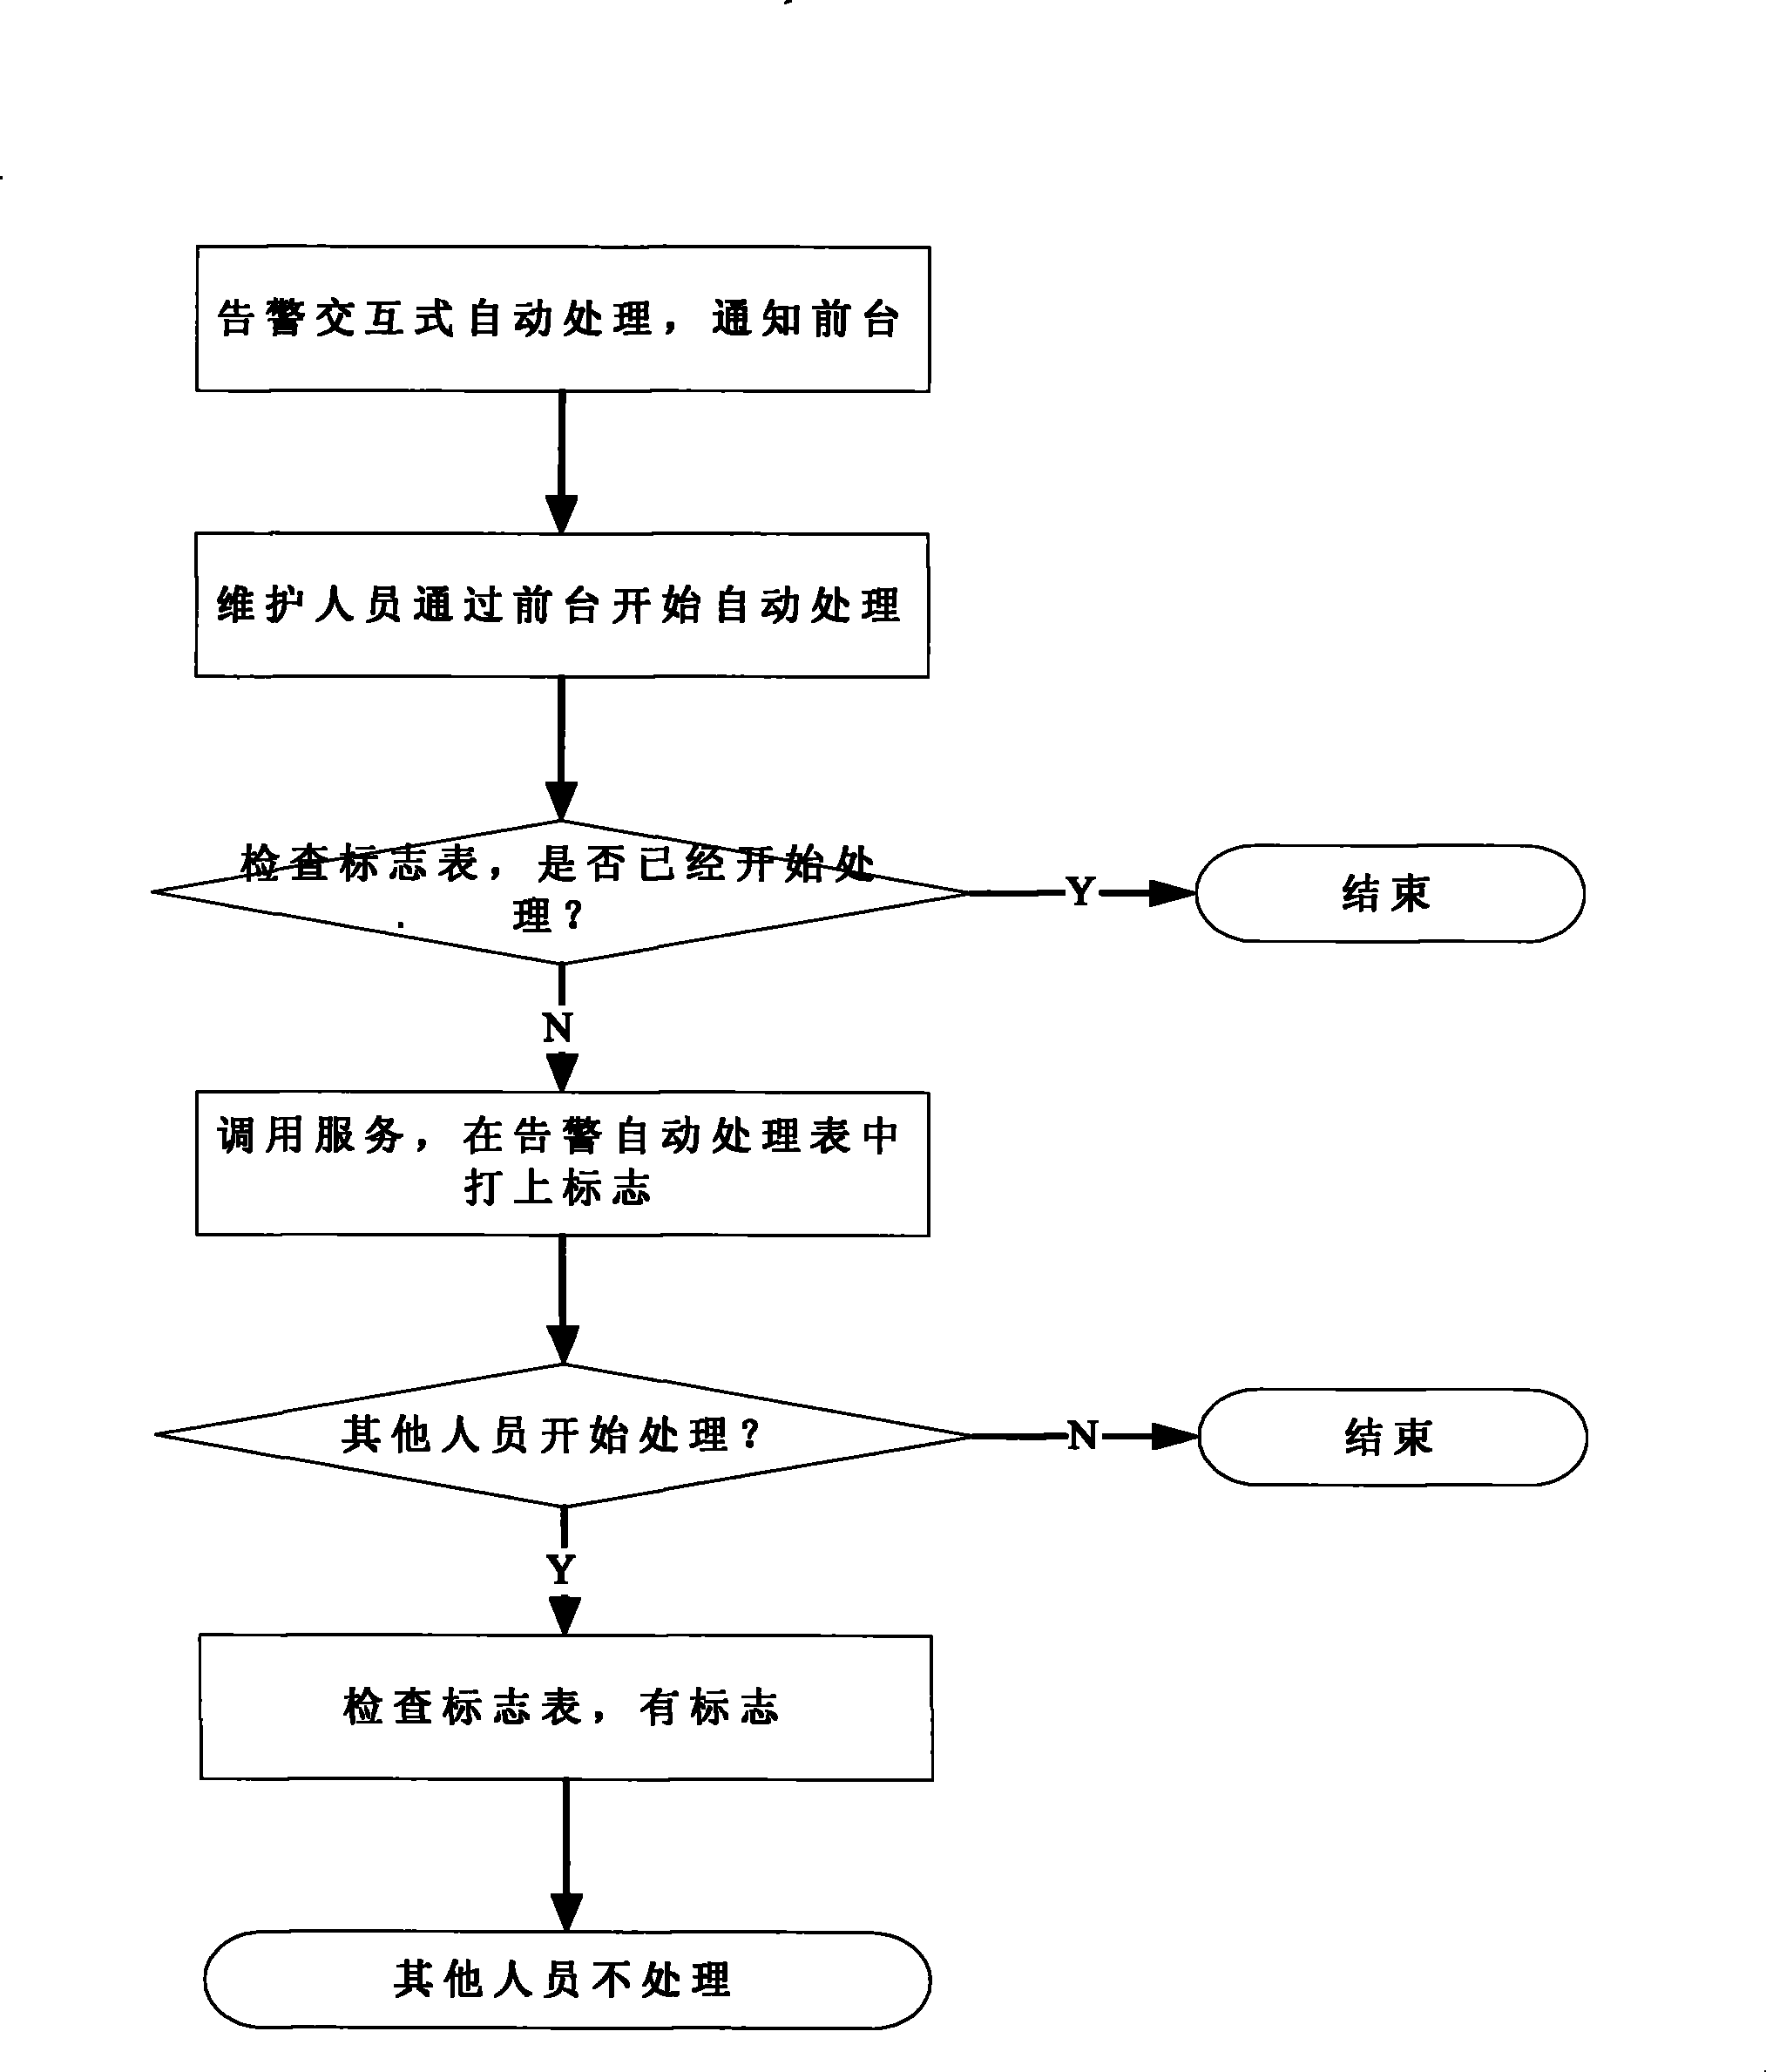 Alarm interactive automatic processing method for communication network management system